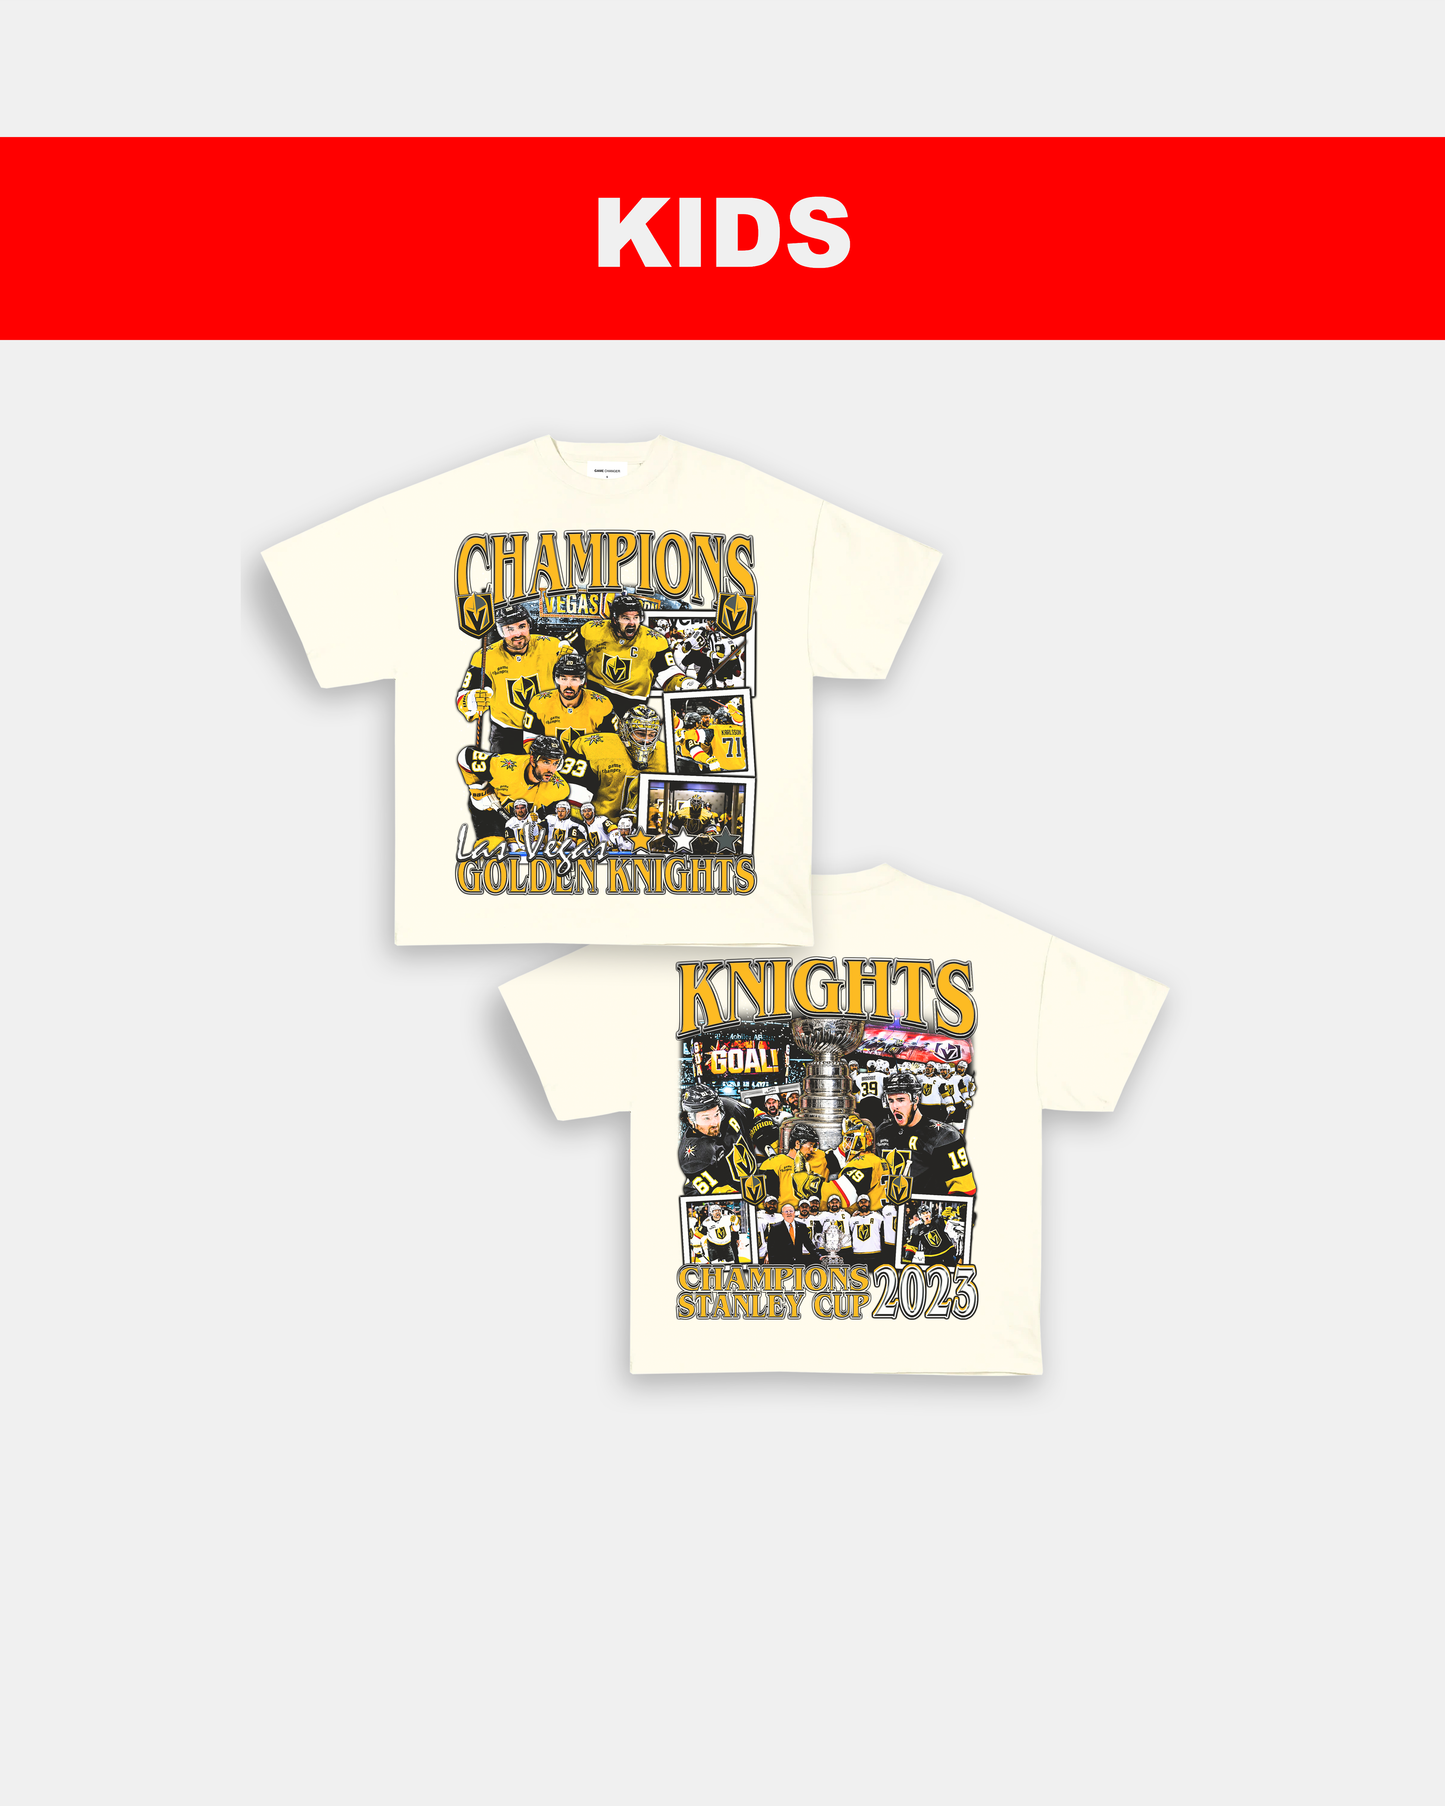 2023 STANLEY CUP CHAMPIONS - KIDS TEE - [DS]